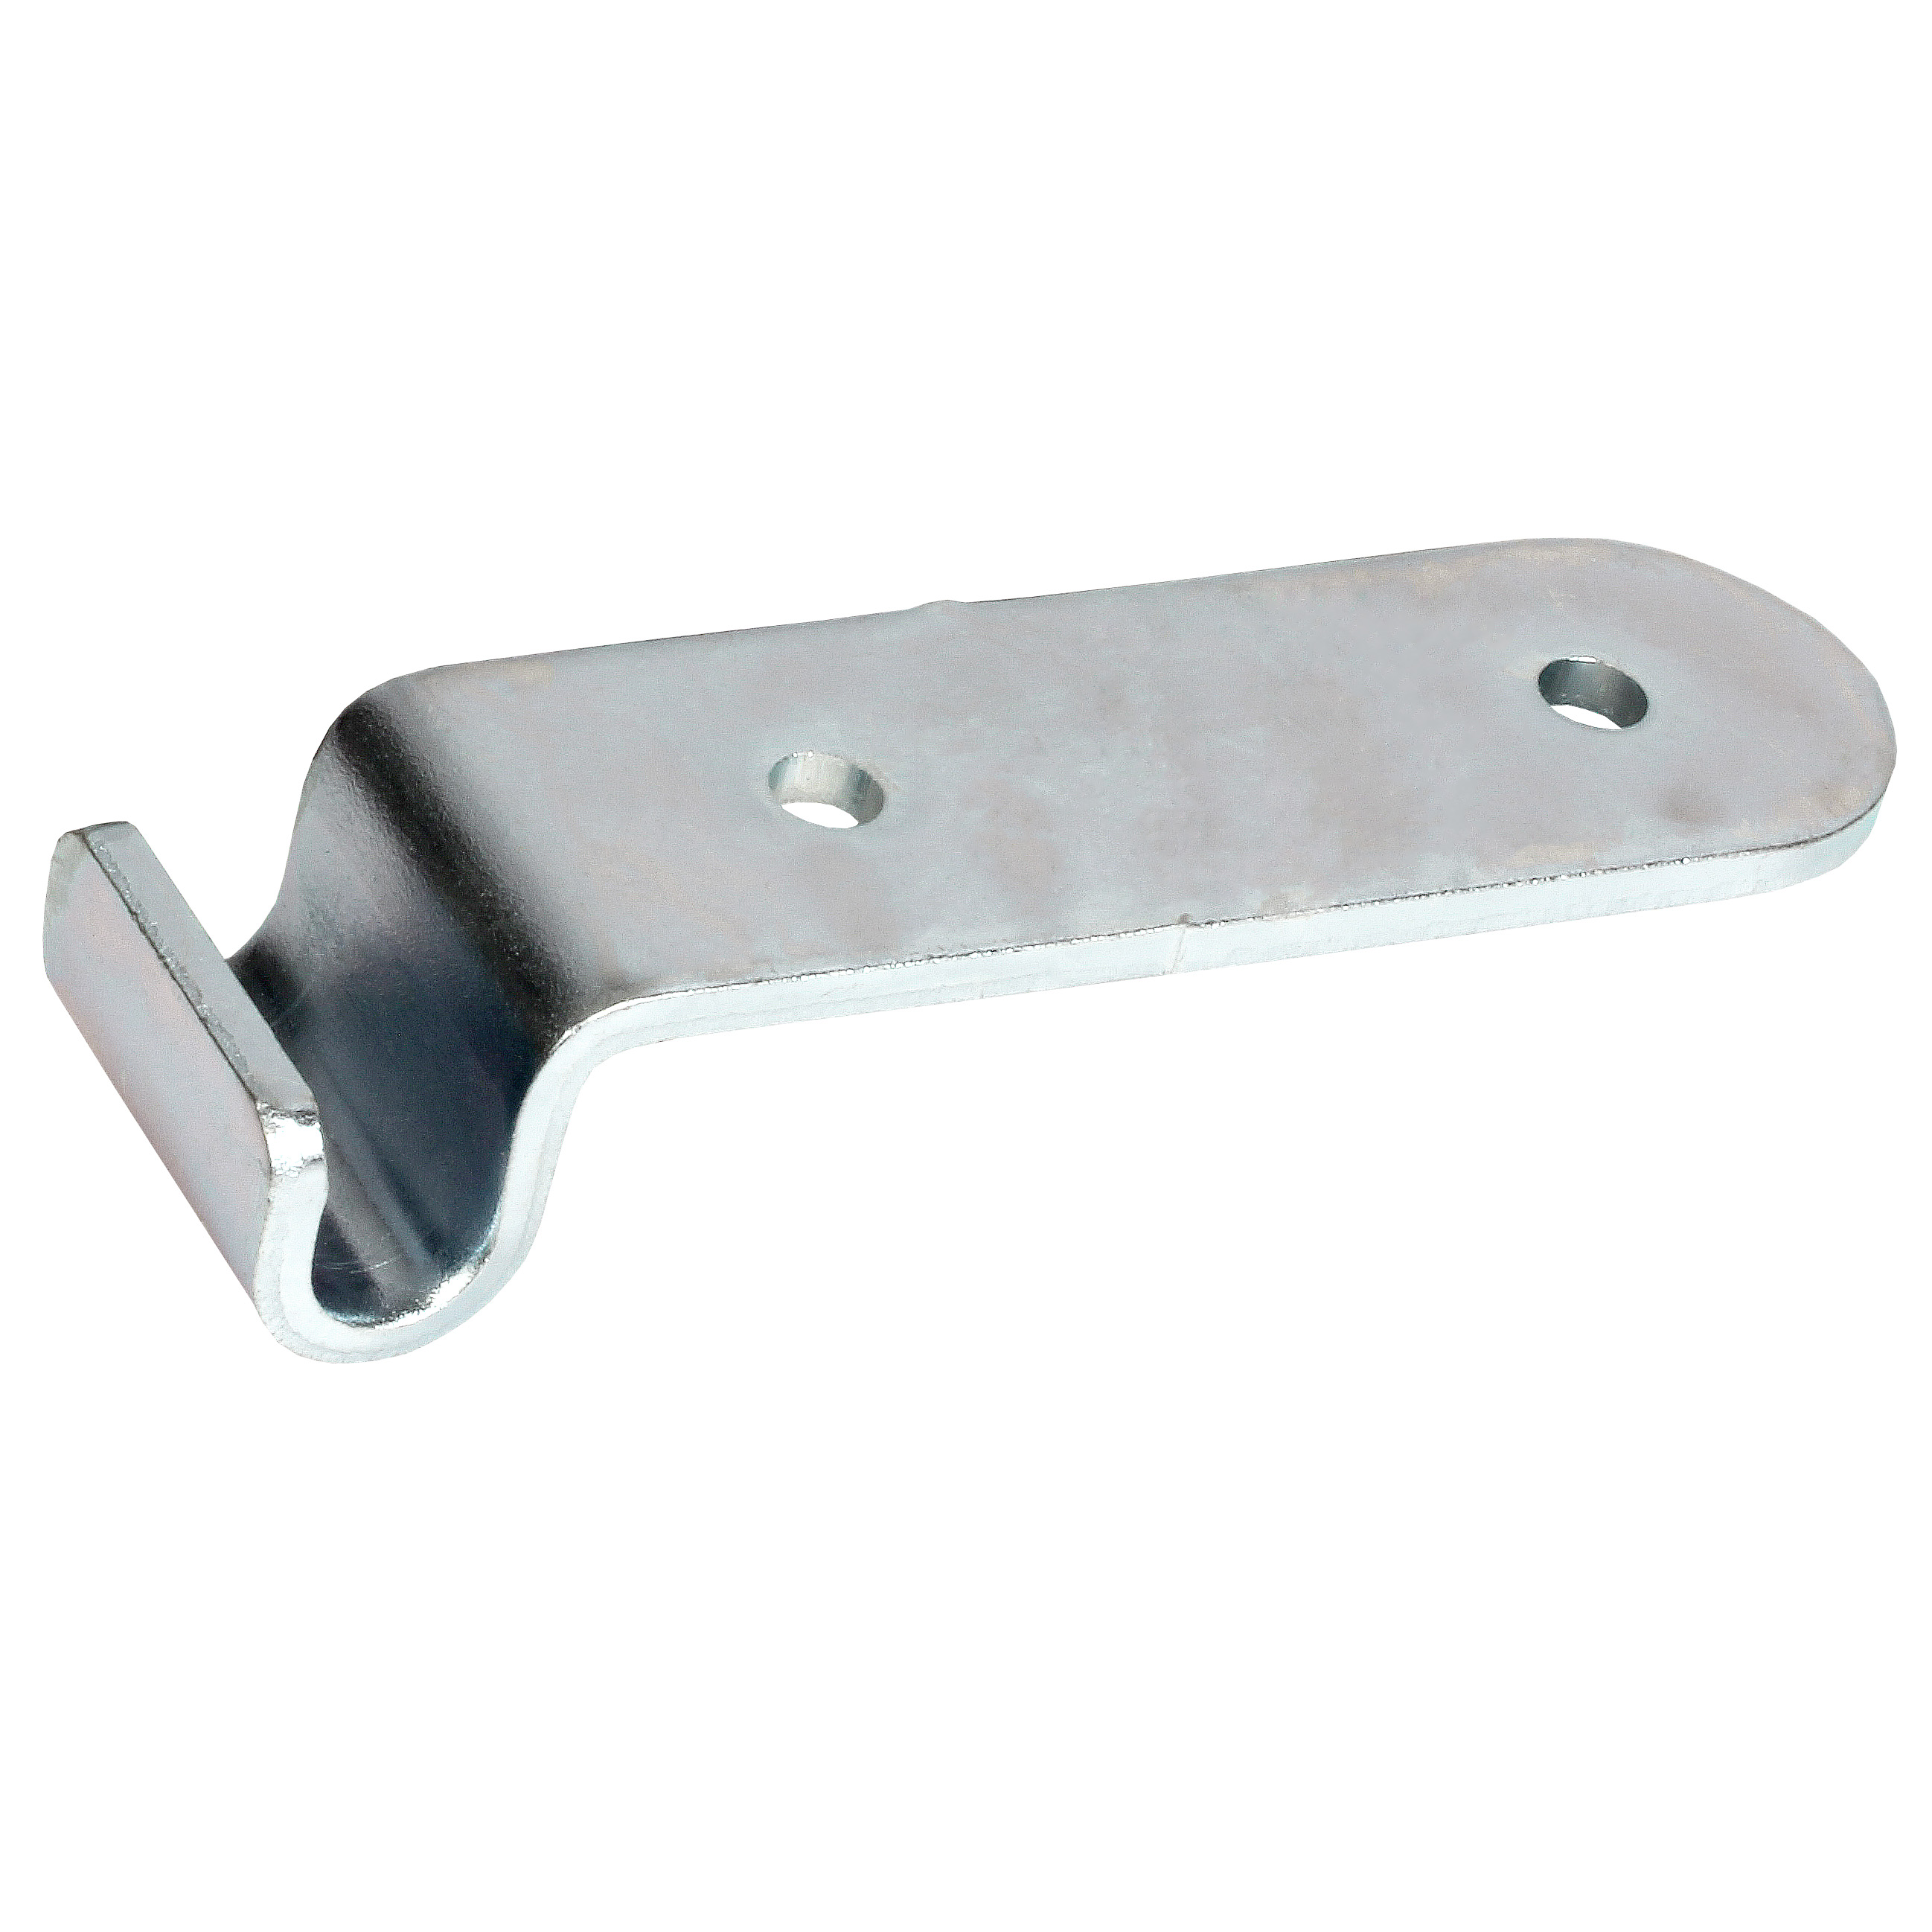 Catch plate for toggle latch - 25.5mm - Steel - Right angled